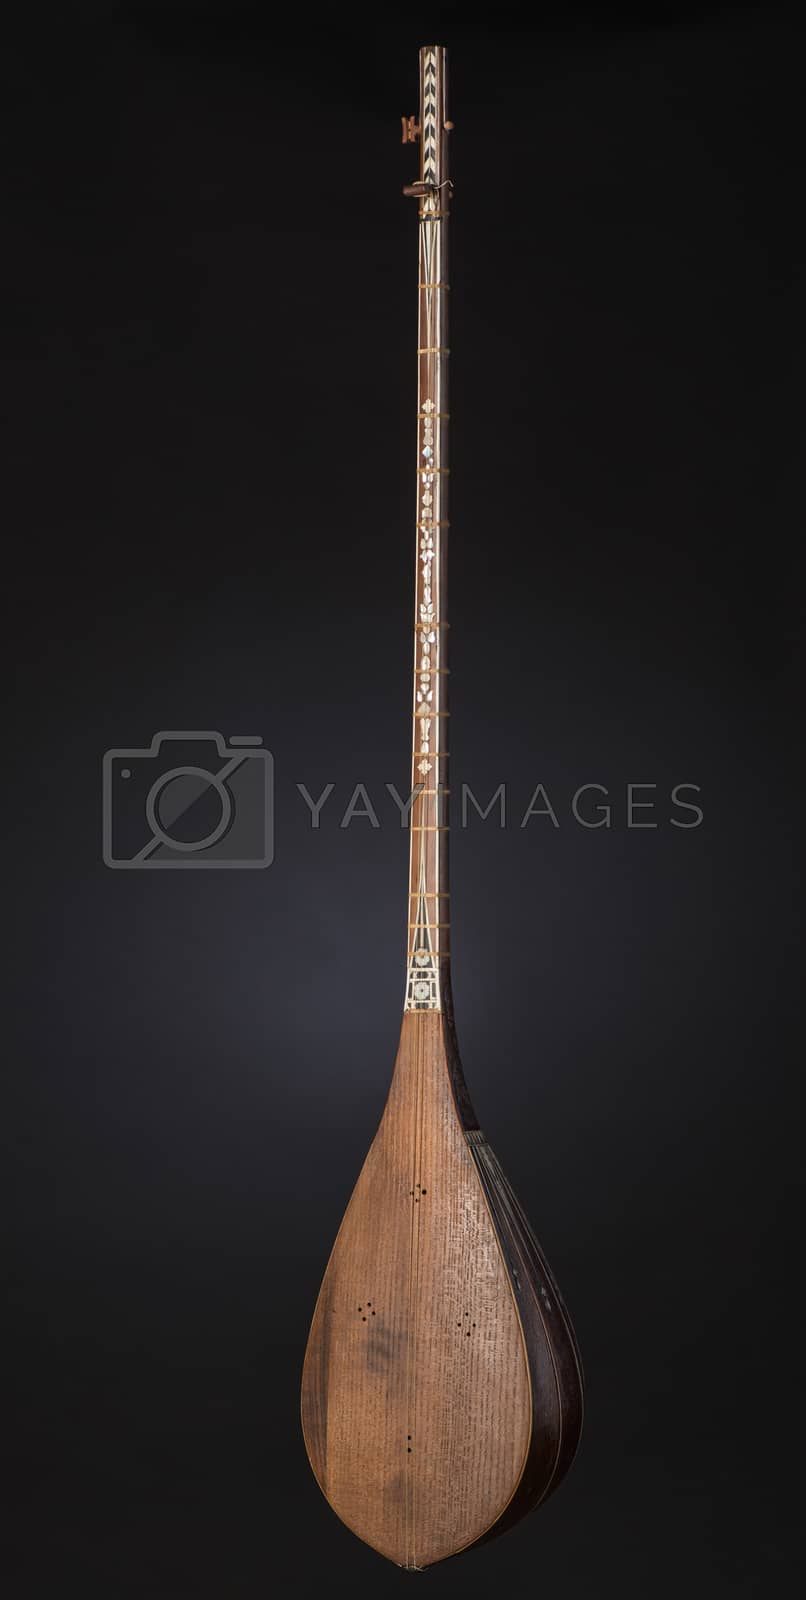 Royalty free image of national musical instrument of Asia by A_Karim